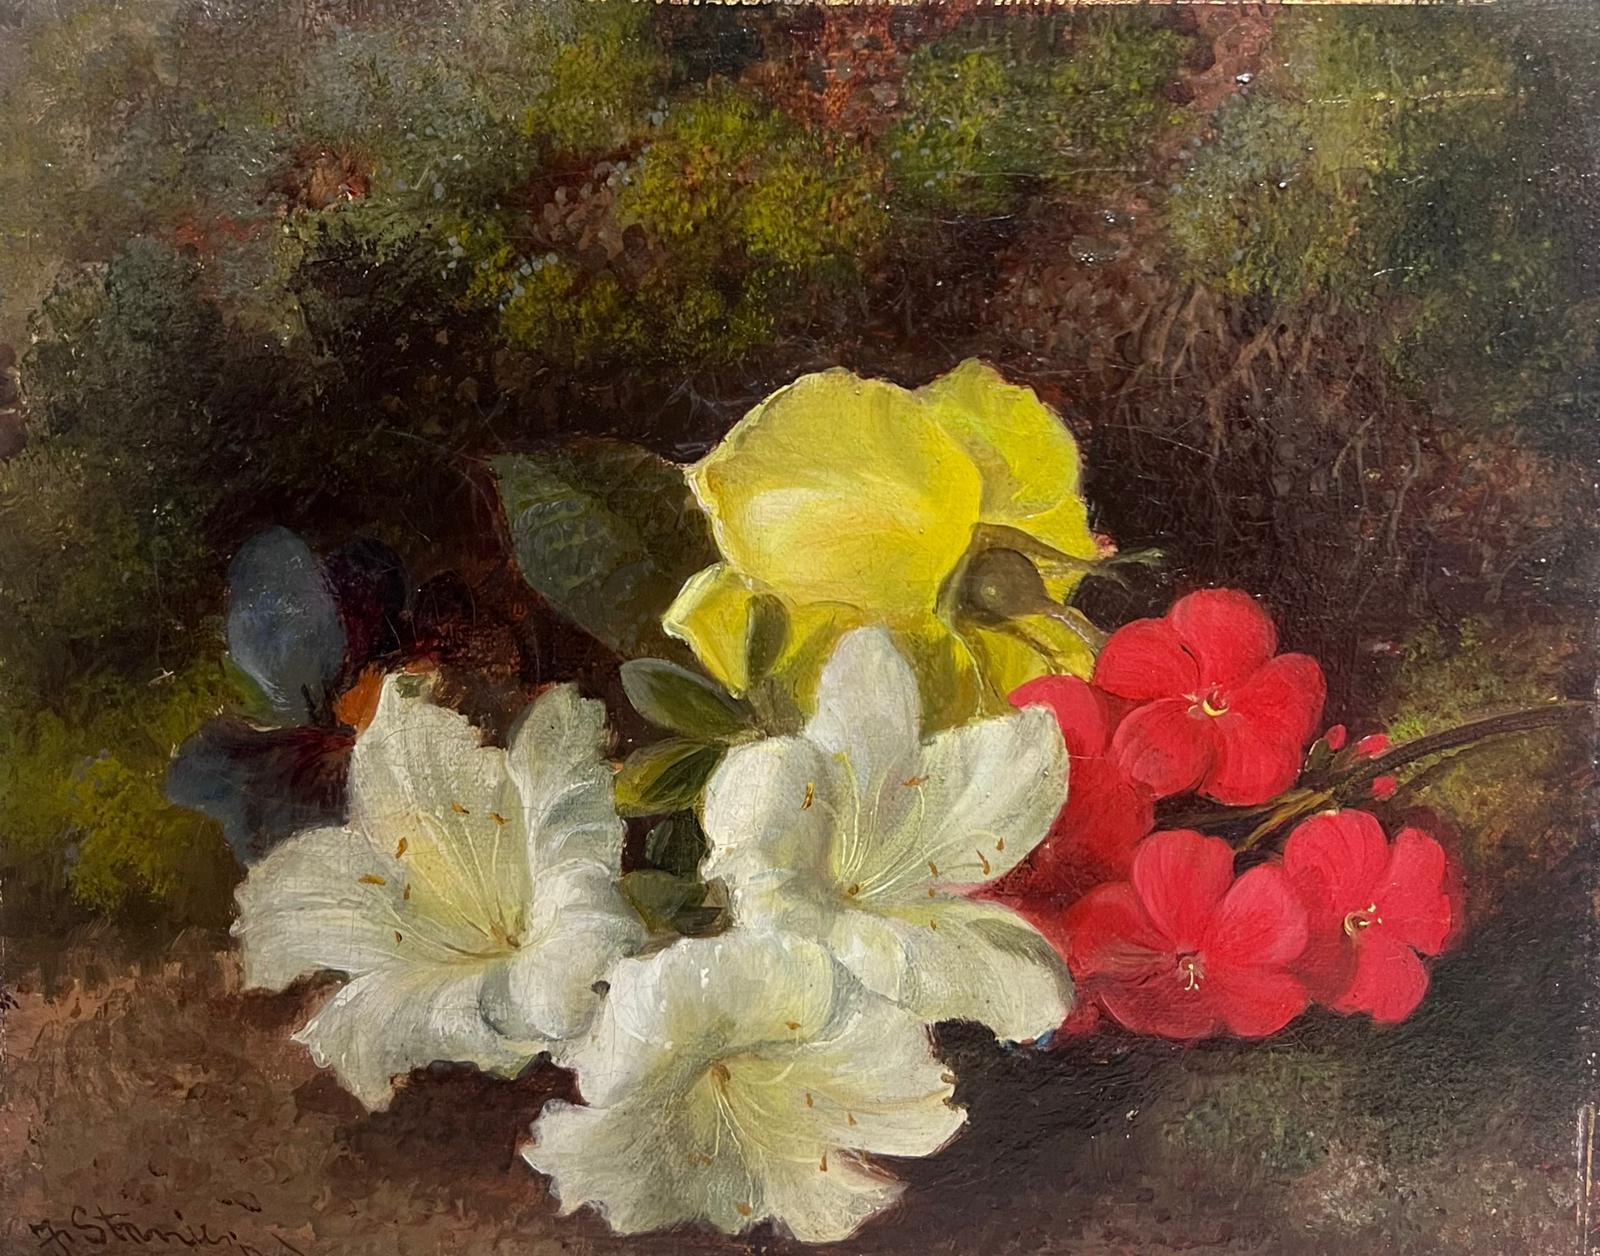 Charming Victorian English Still Life Oil Painting Flowers in Natural Setting - Brown Interior Painting by Frederick J Stanier